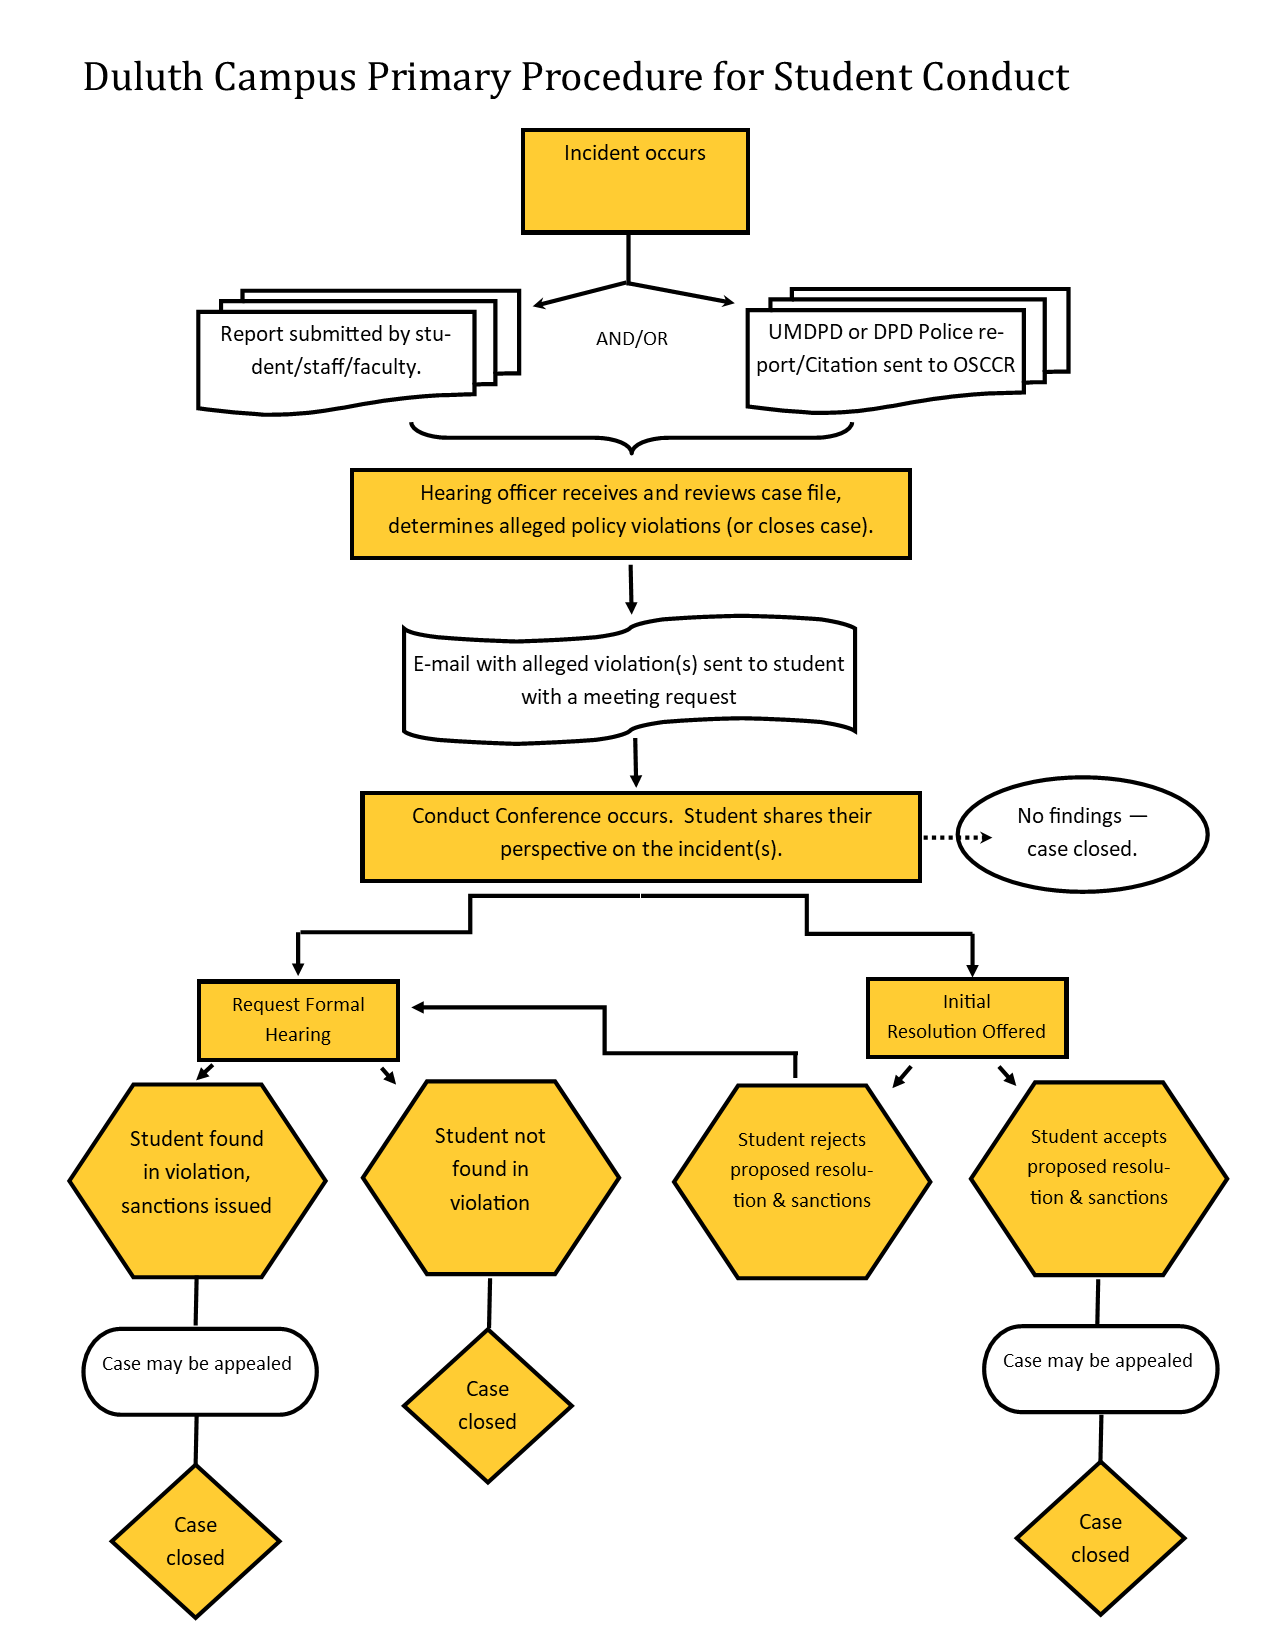 Duluth Campus Primary Procedures for Student Conduct Flow Chart (click for PDF)